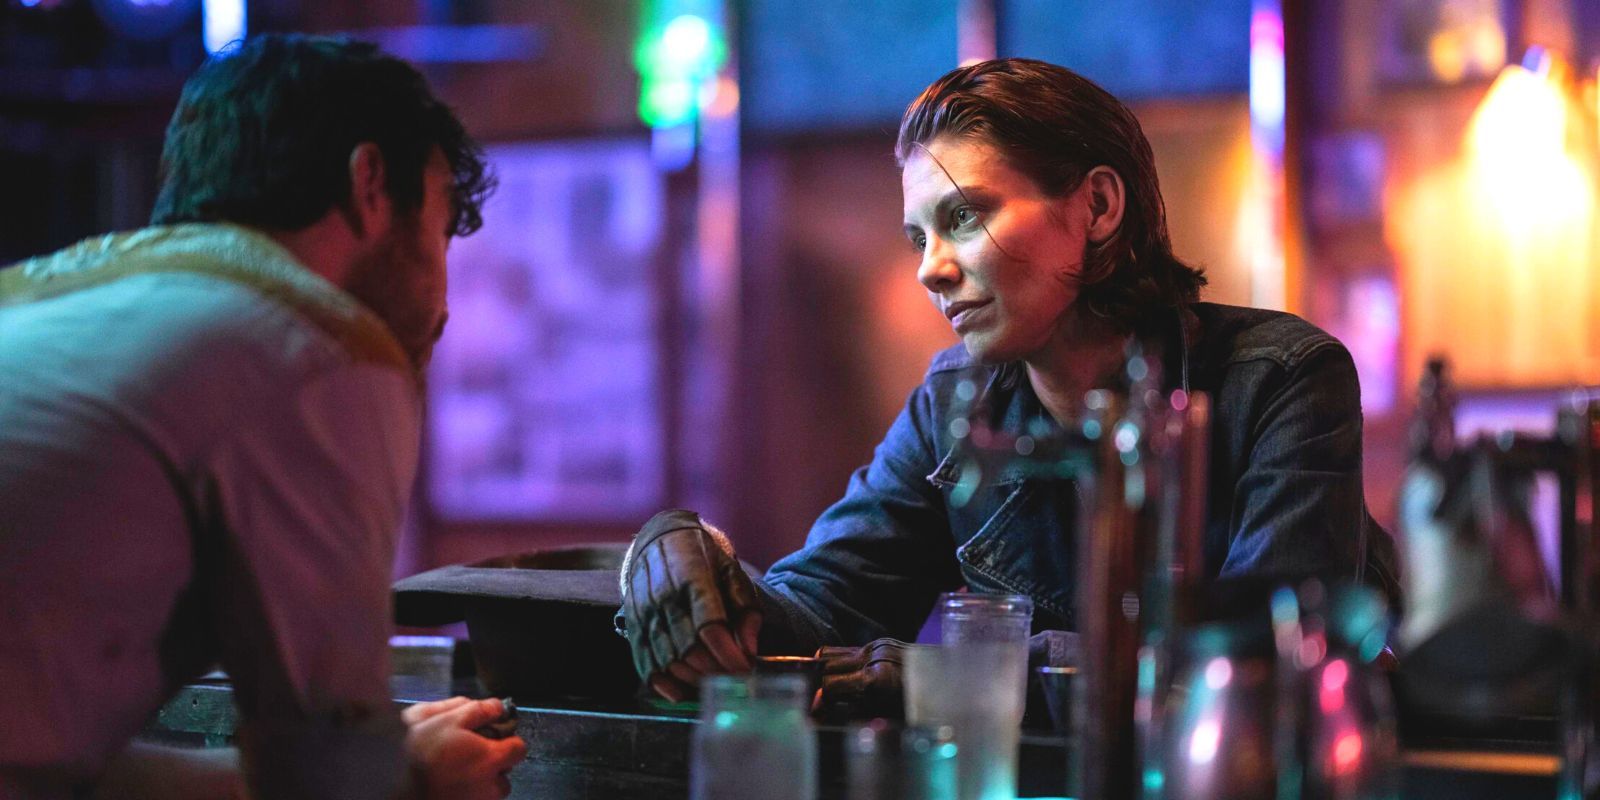 The Walking Dead's Maggie sitting at a bar while talking to the bartender